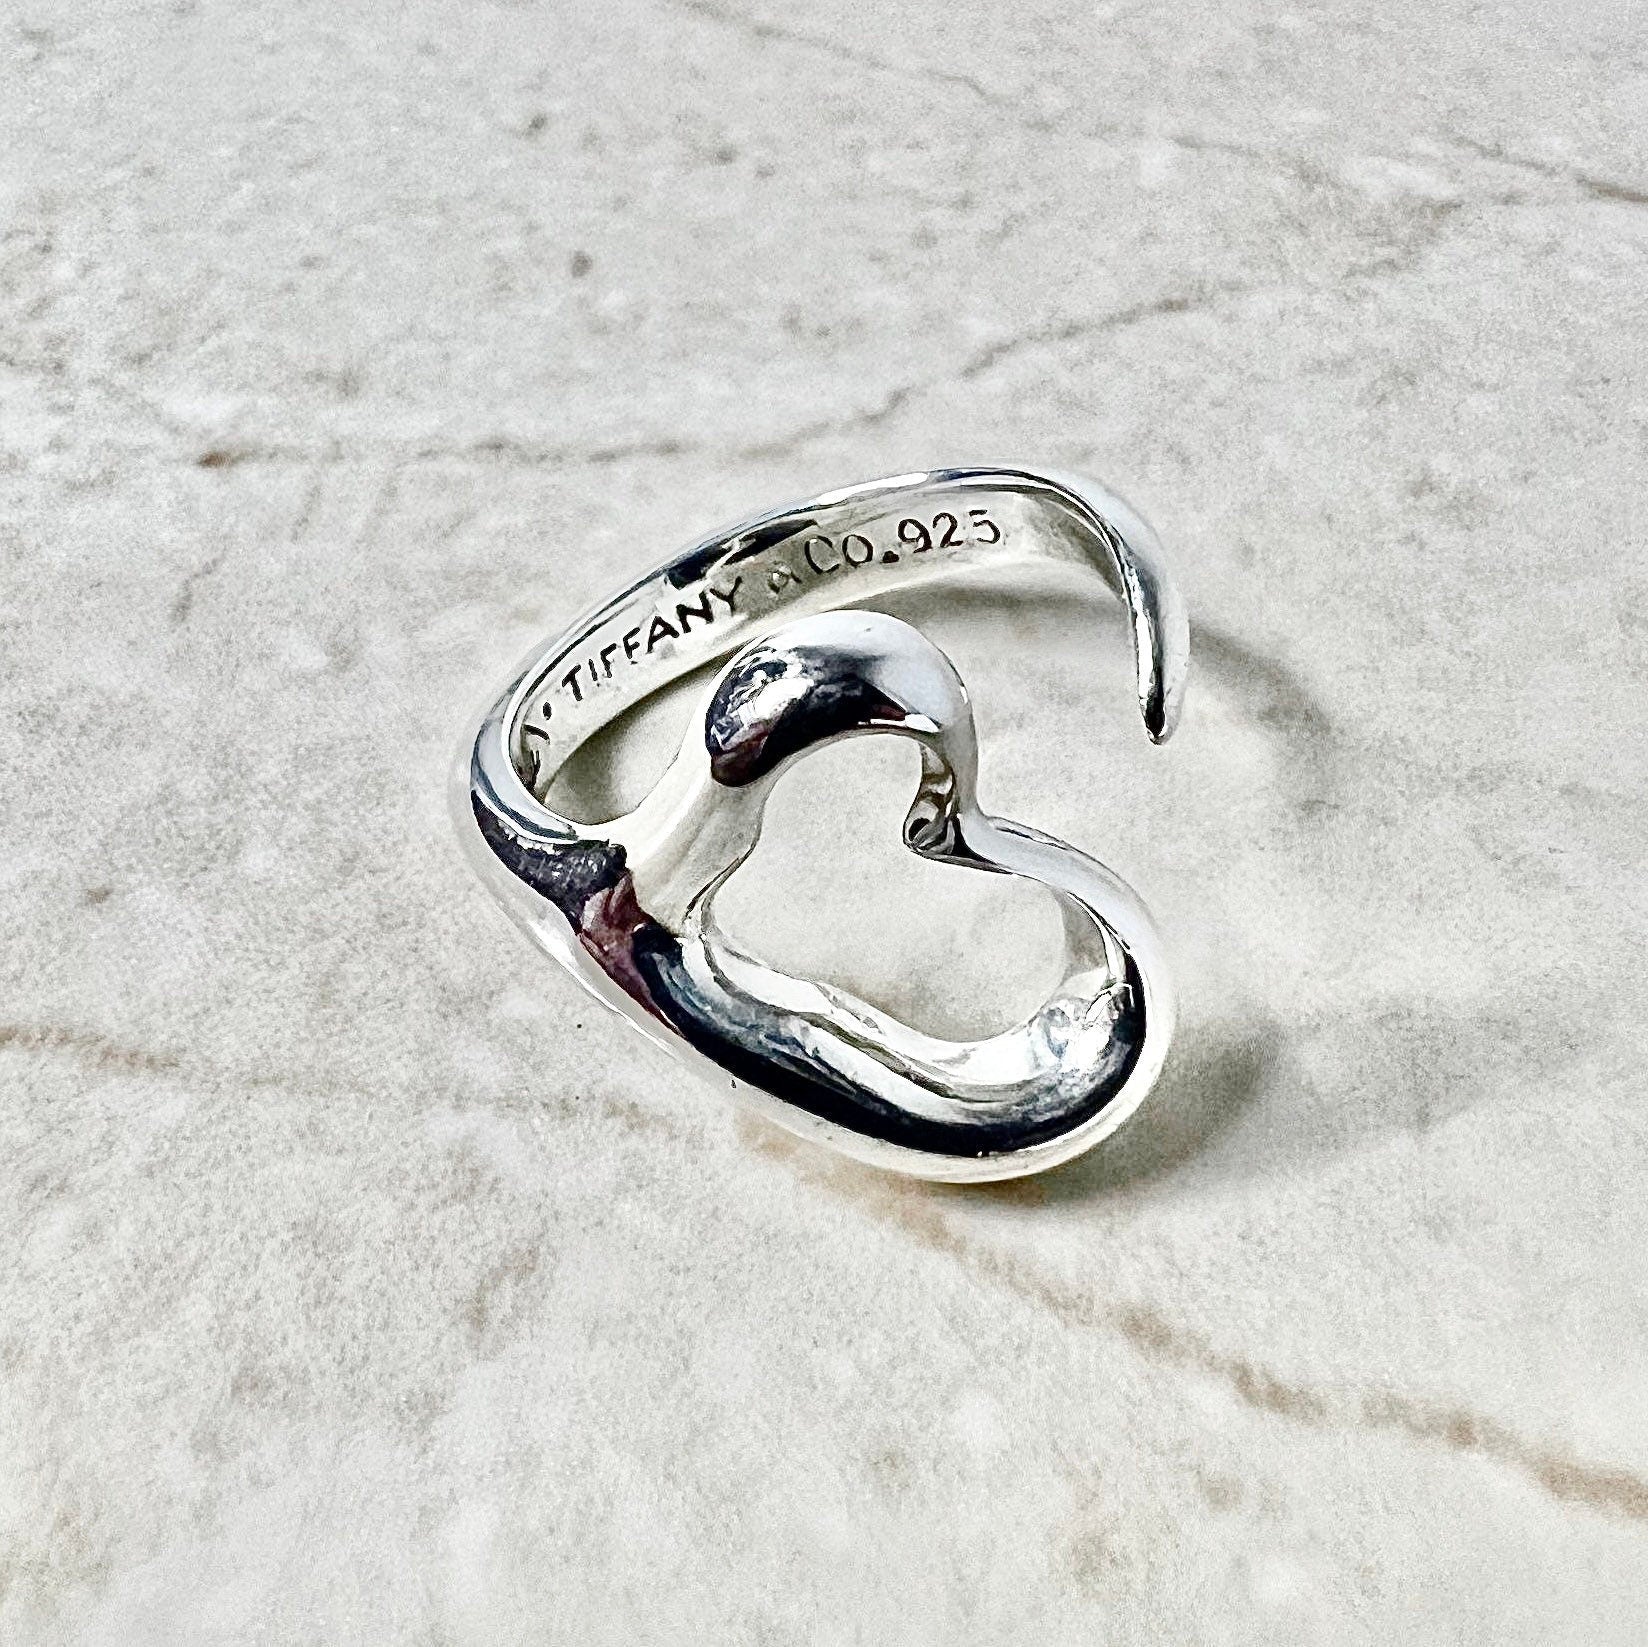 Tiffany & Co Elsa Peretti Open Heart Ring - Sterling Silver Tiffany Open Heart Ring - Silver Tiffany Heart Ring-Valentine’s Day Gift For Her